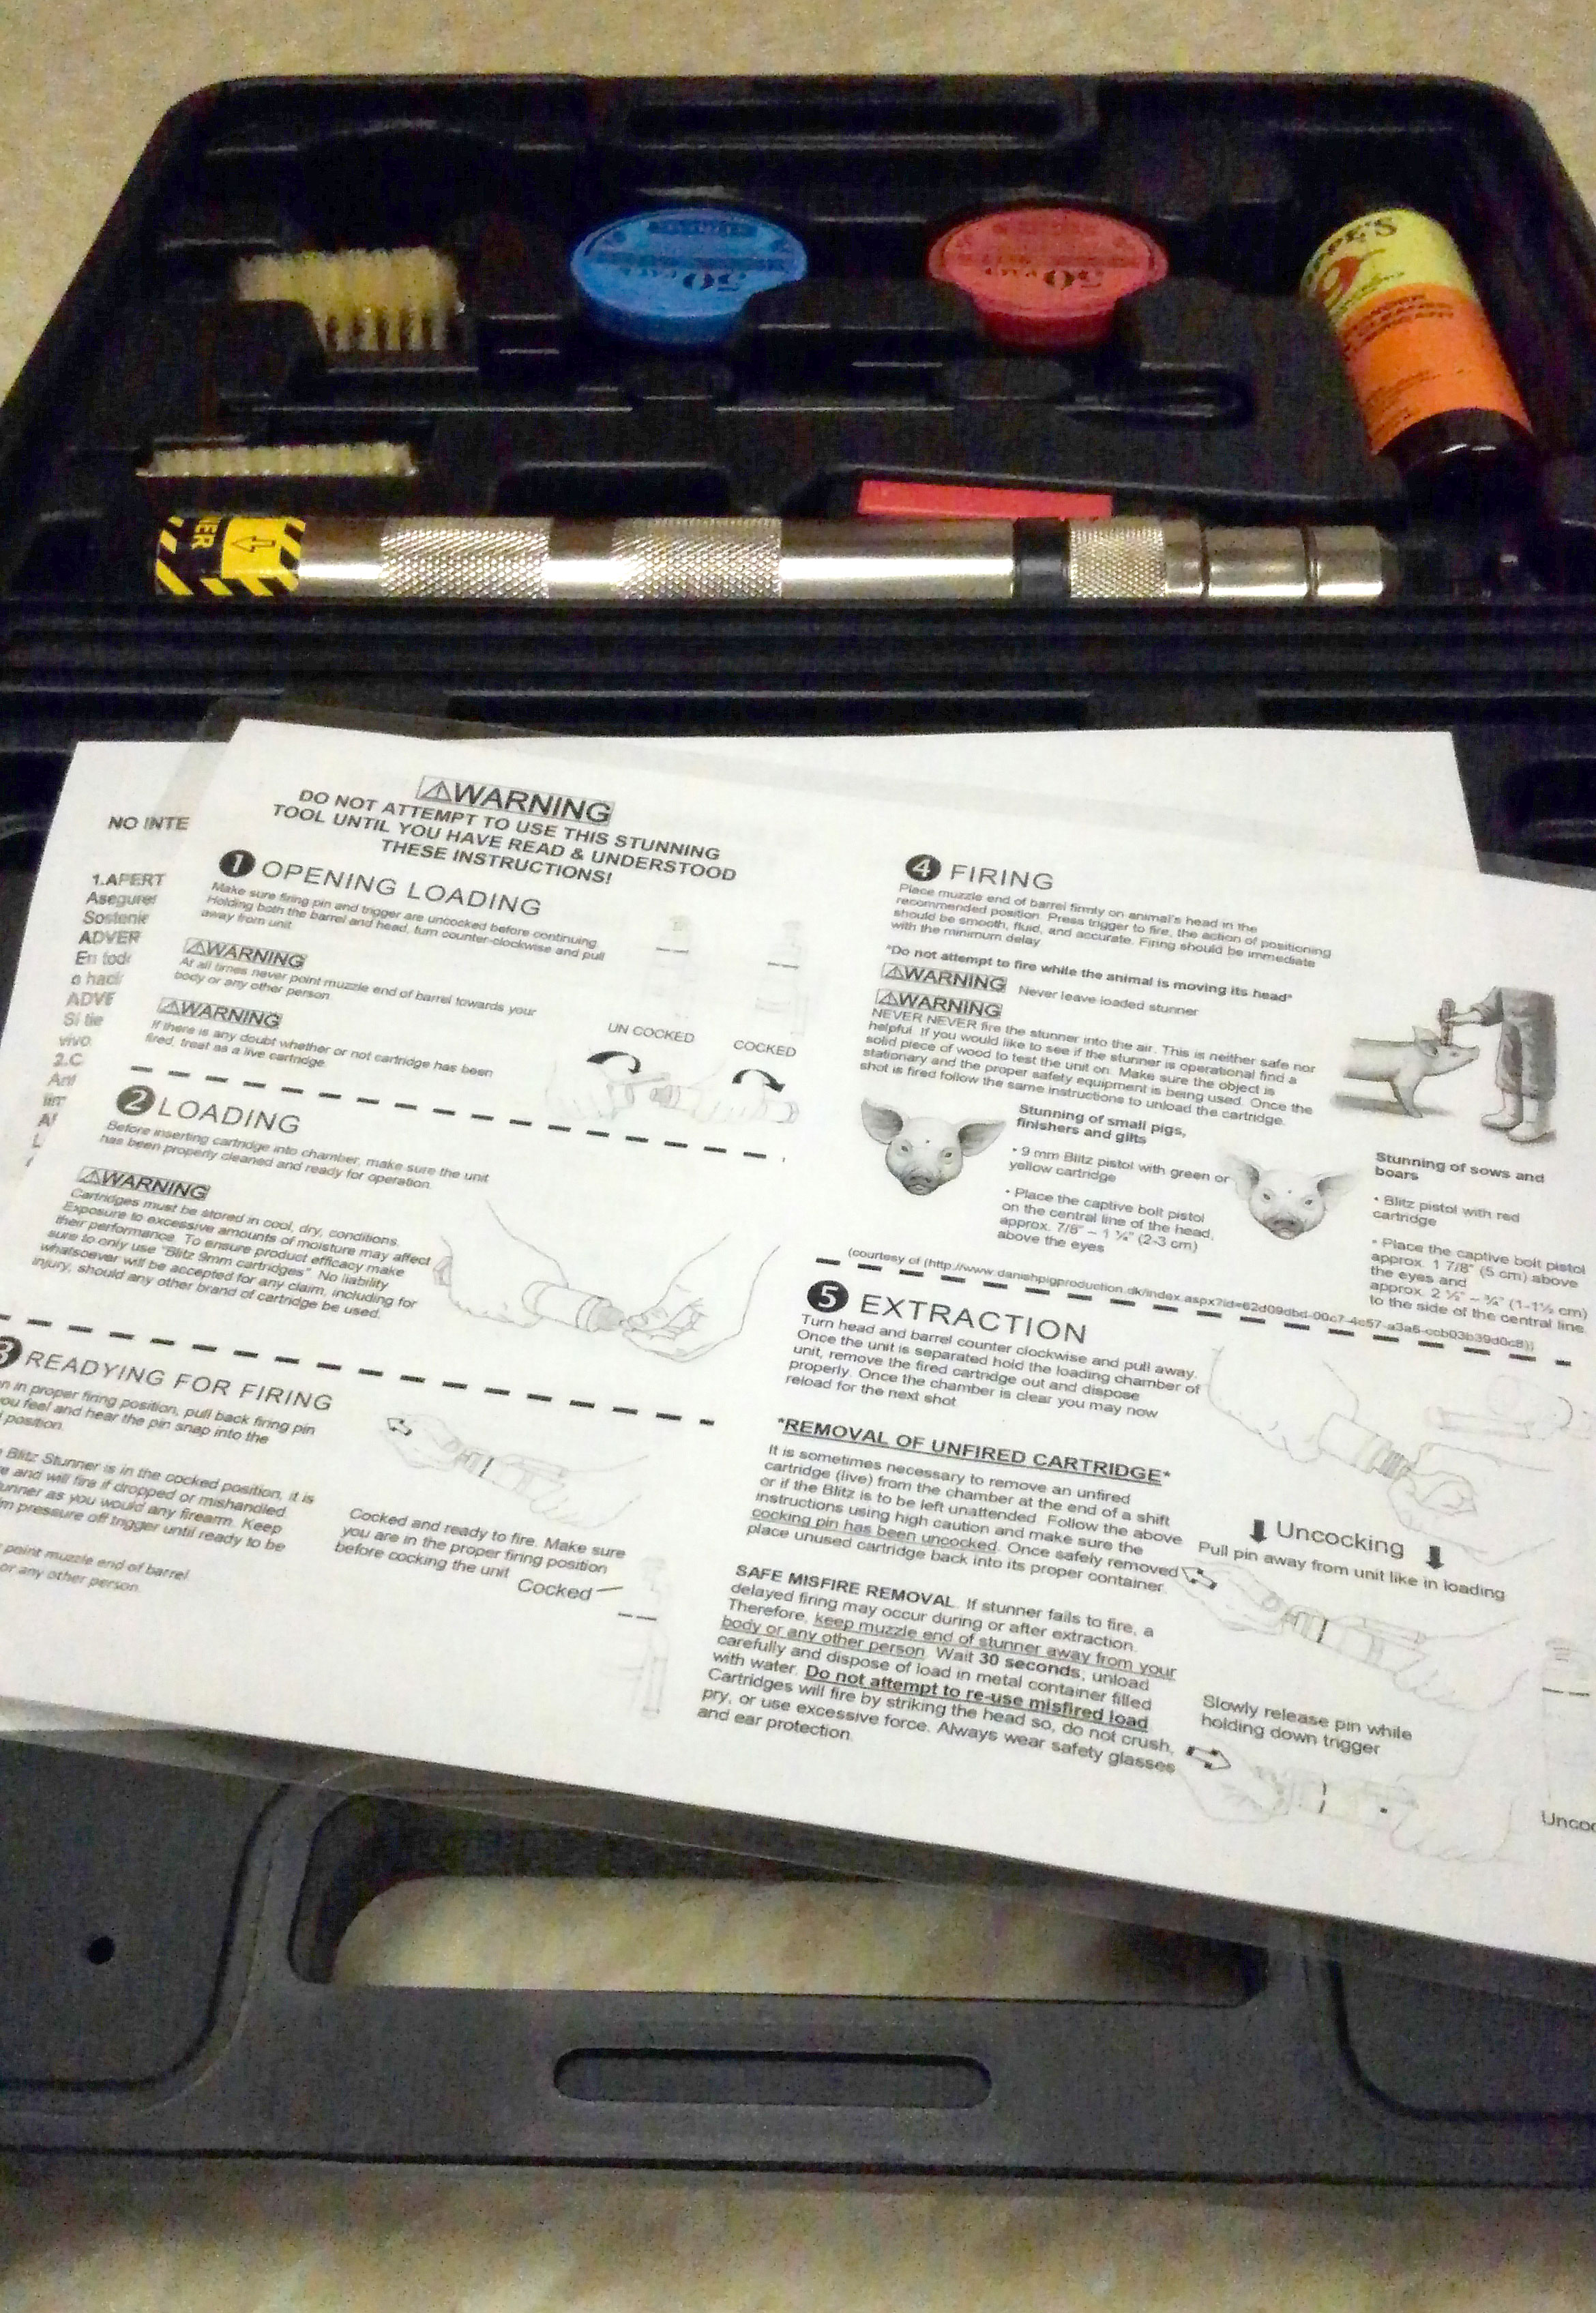 A black, plastic case containing a captive bolt stunner kit along with laminated instructions for properly using the tool for euthanasia.